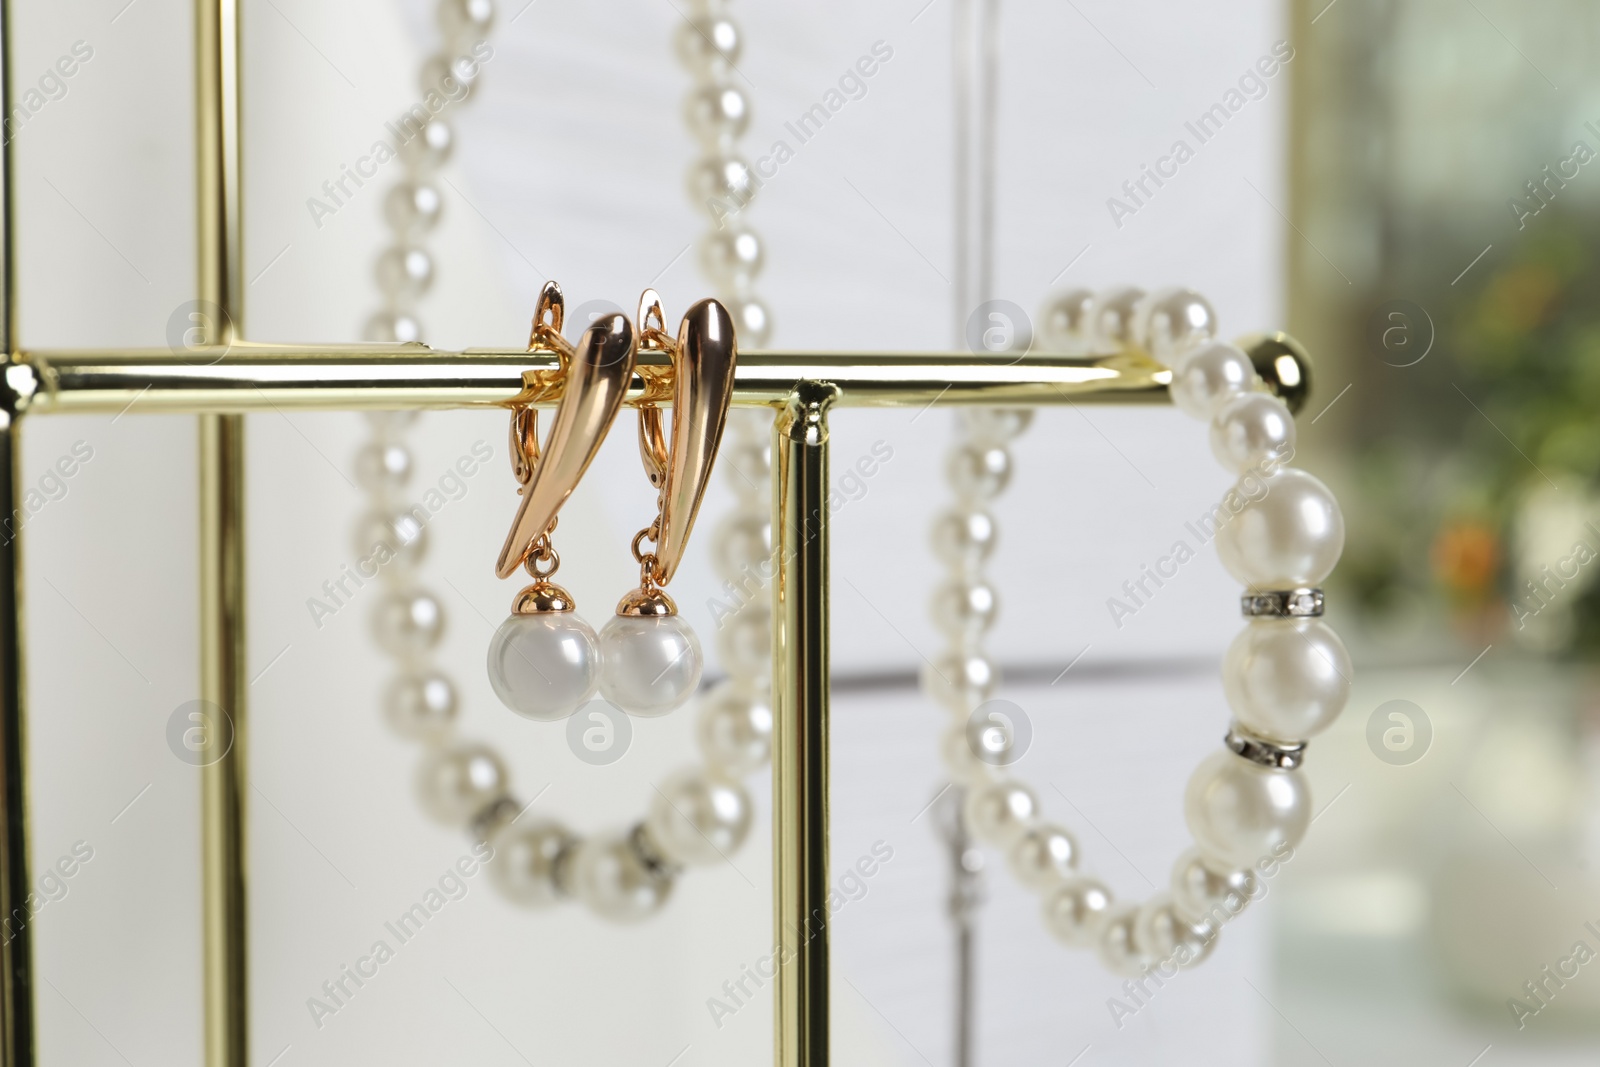 Photo of Luxurious pearl bracelet, earrings and necklace on stand, closeup view